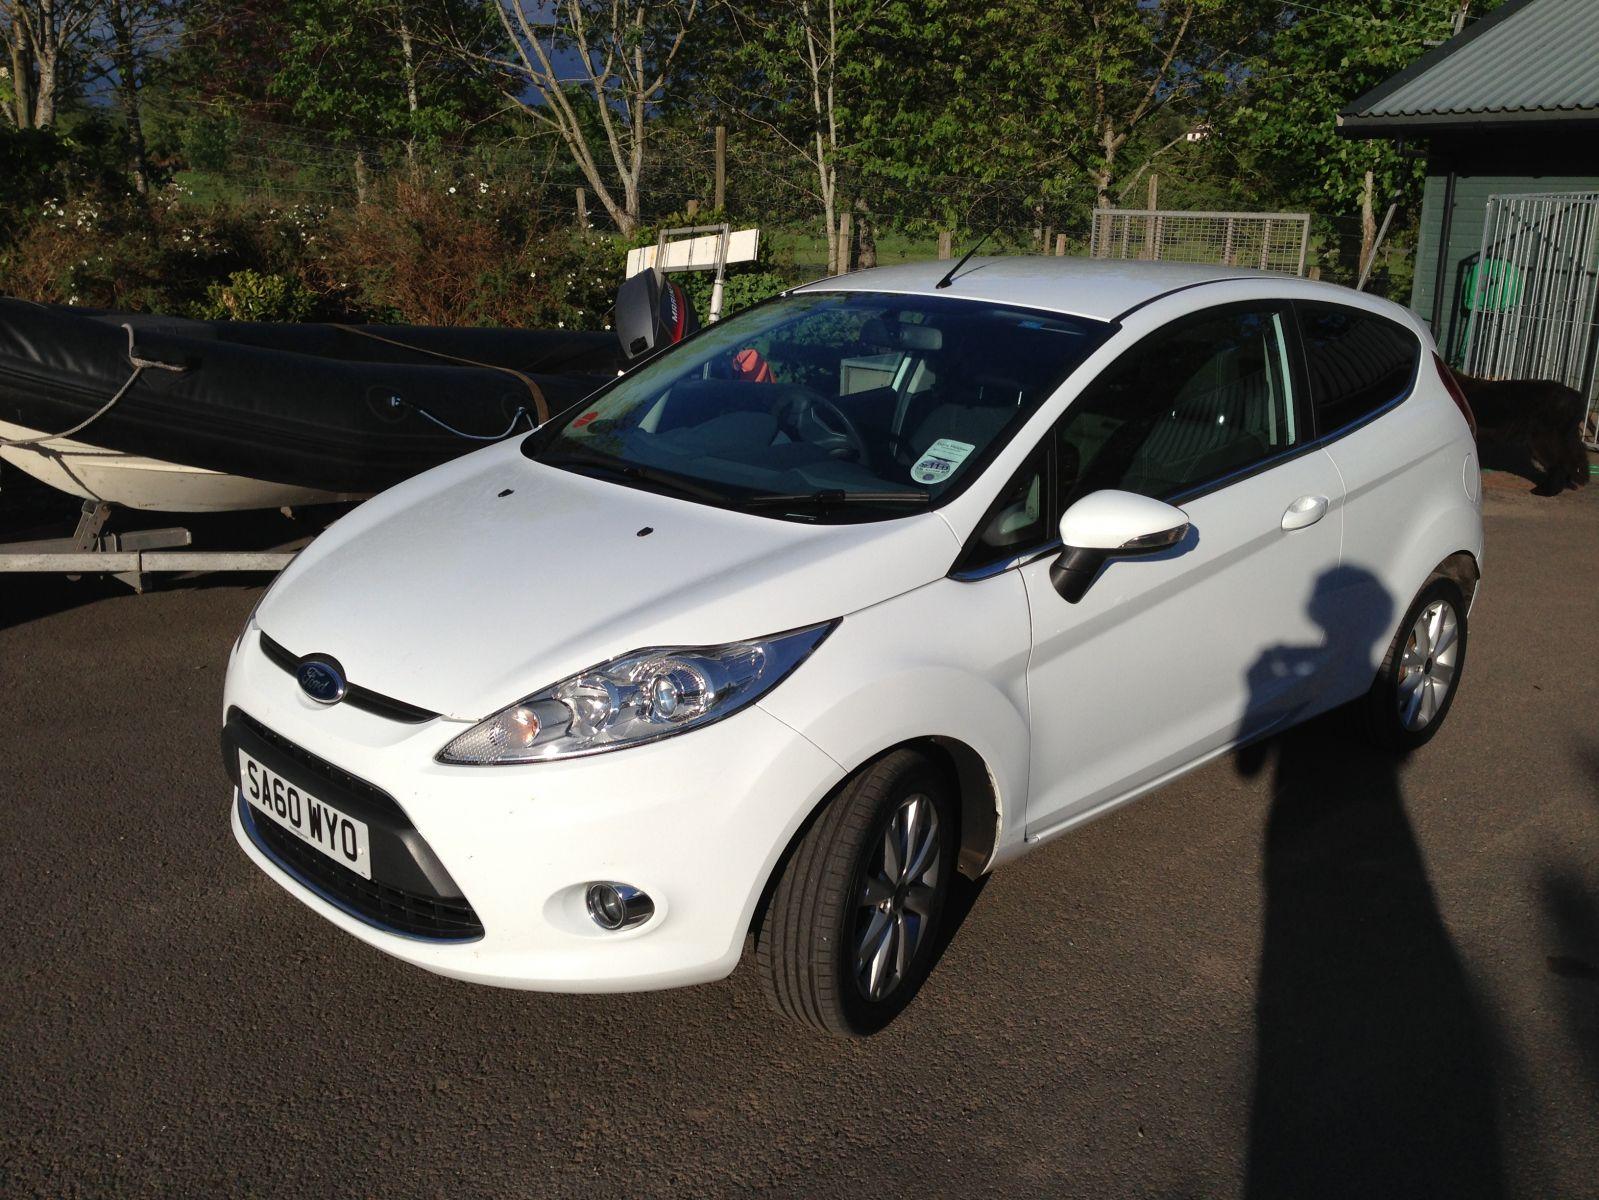 My new Fiesta just back home from buying it